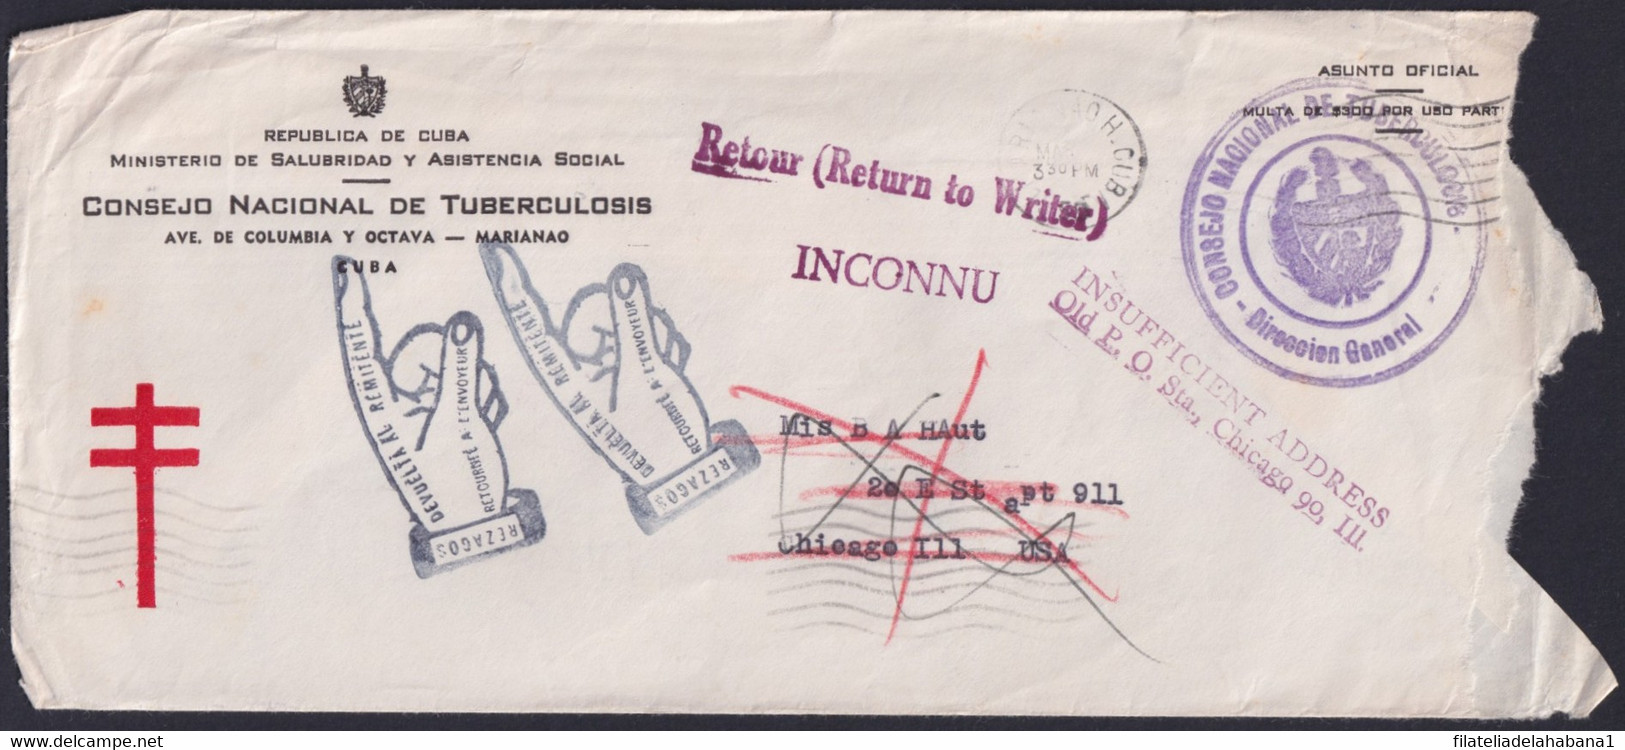 1959-H-39 CUBA 1959 LG-2158 OFFICIAL COVER POSTMARK FORWARDED COVER TO USA. - Lettres & Documents